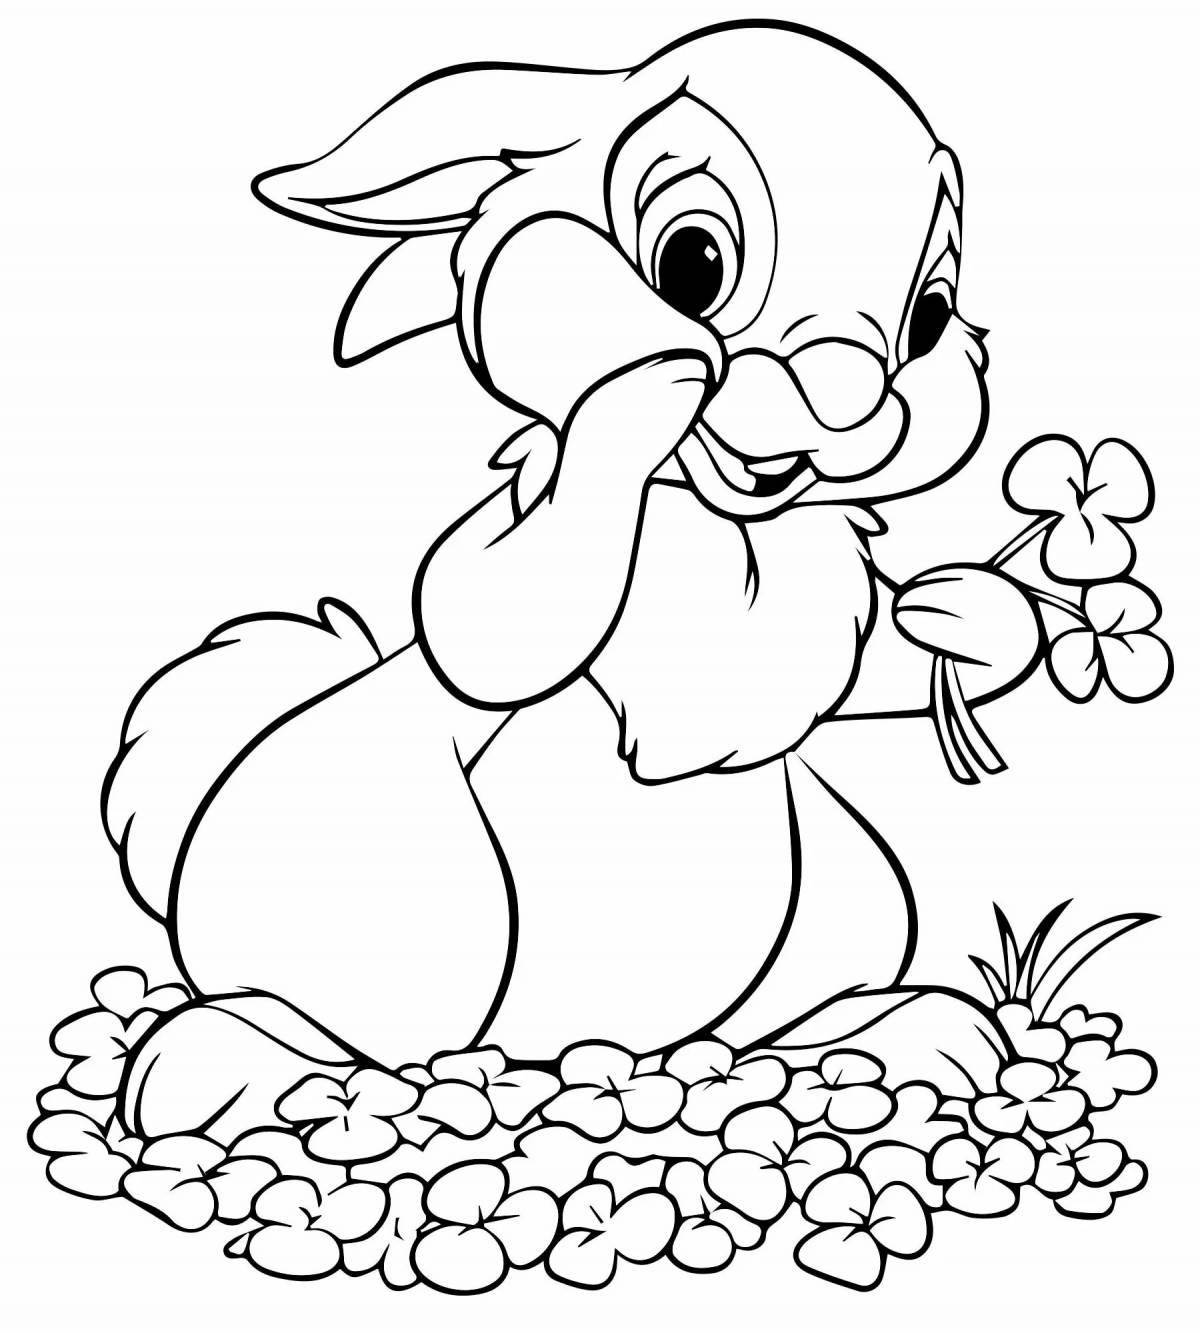 Color-explosion coloring page drawing of a hare for children